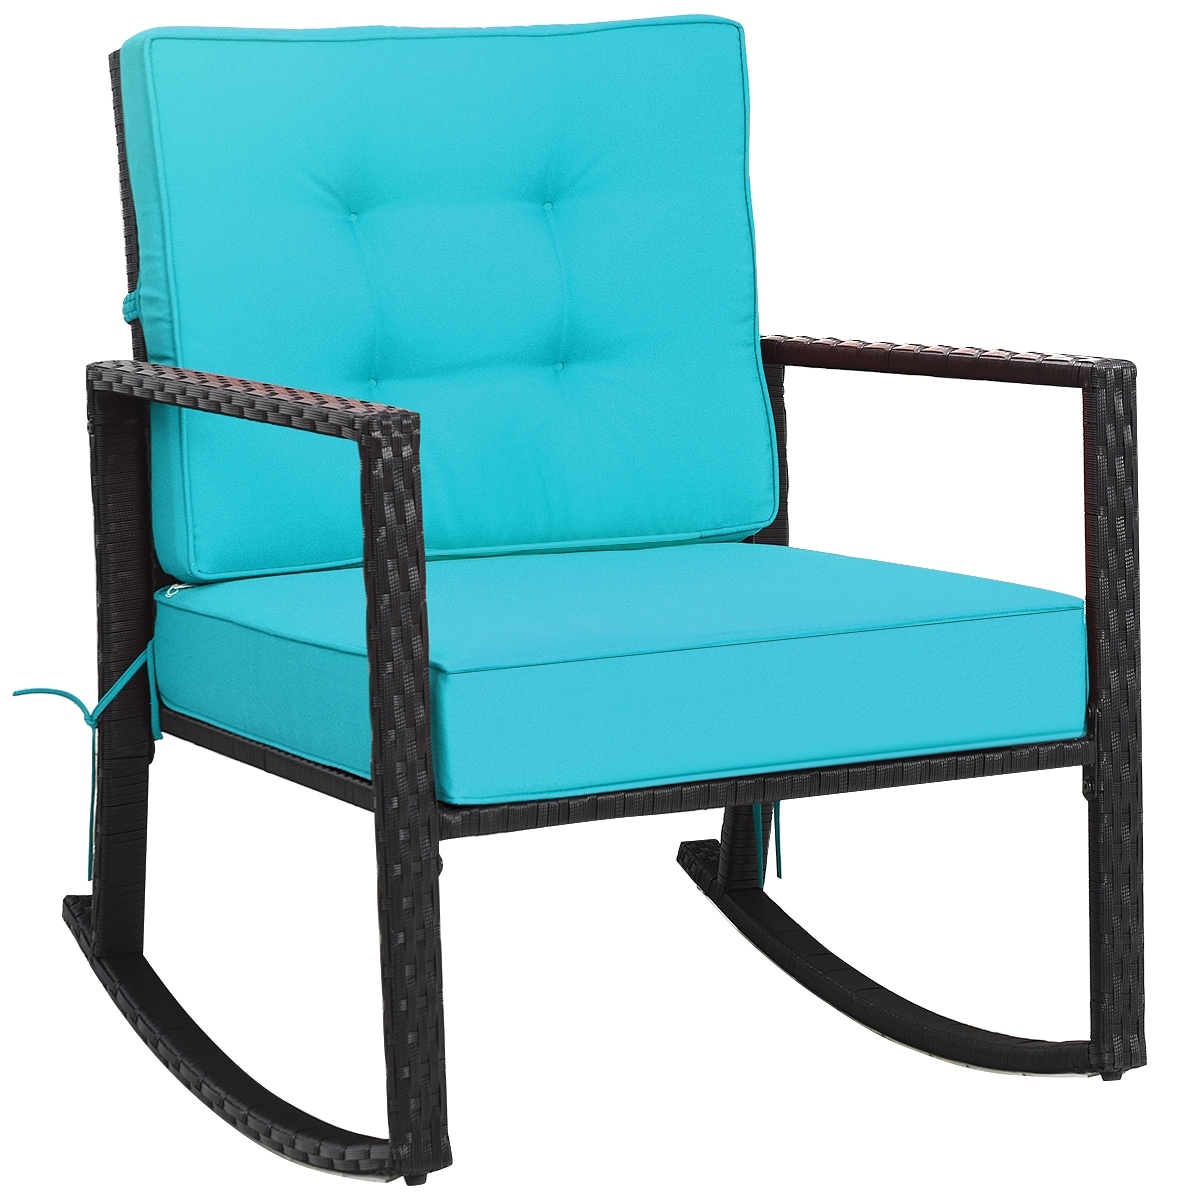 Casainc Patio Chairs Rattan Turquoise, Turquoise Metal Outdoor Furniture